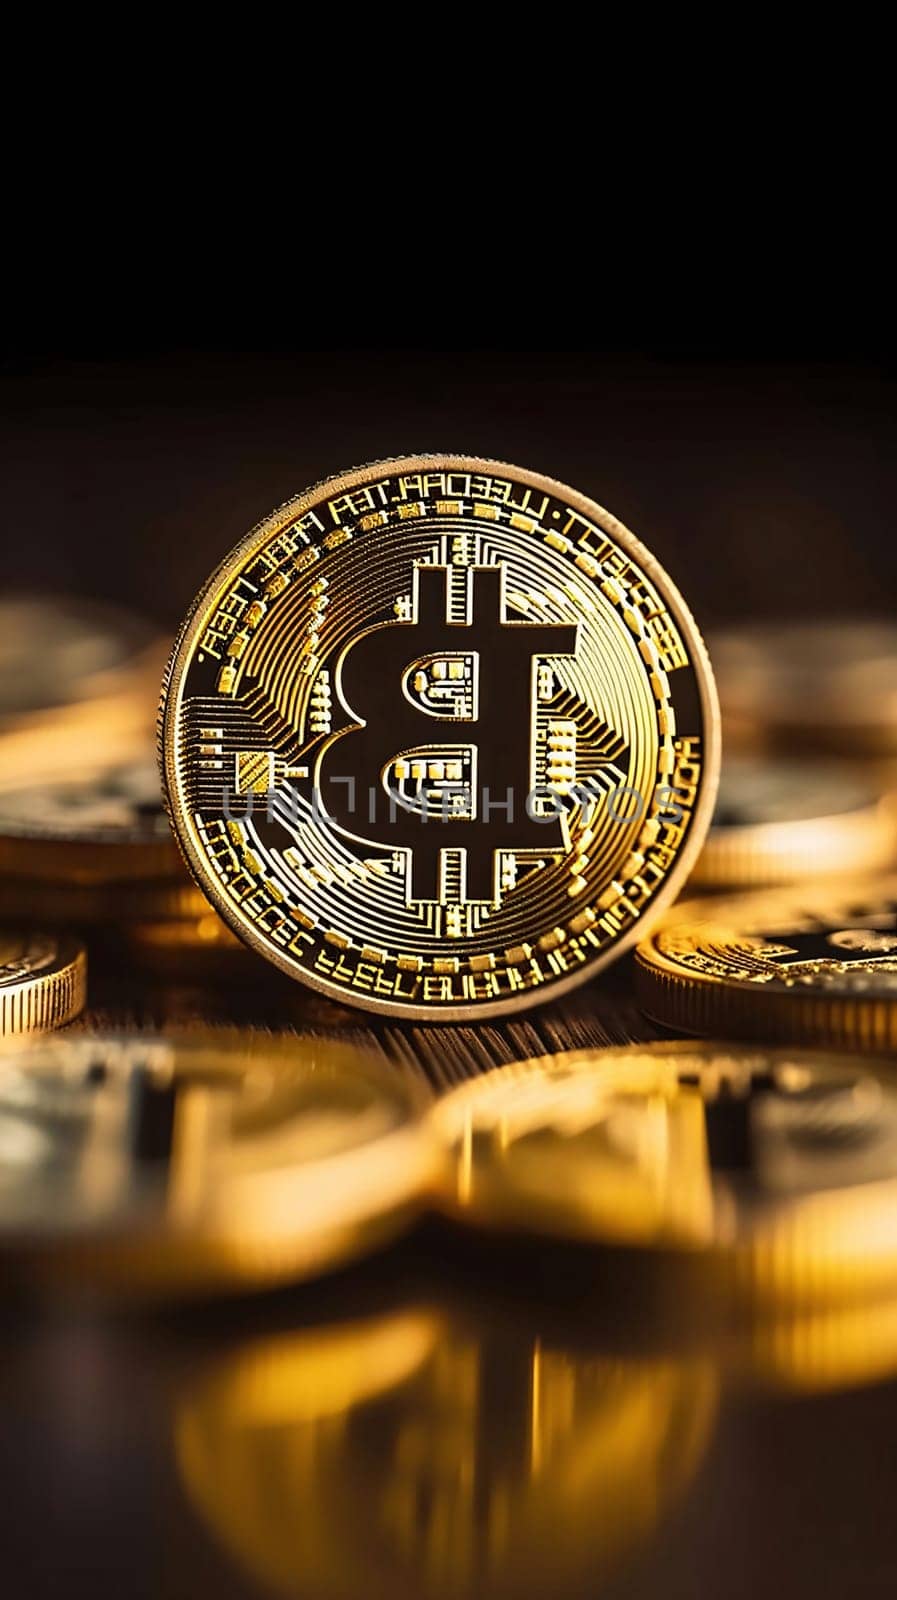 Stock Market: Bitcoin on the background of coins. Bitcoin is a modern way of exchange and this crypto currency is a convenient means of payment in the financial